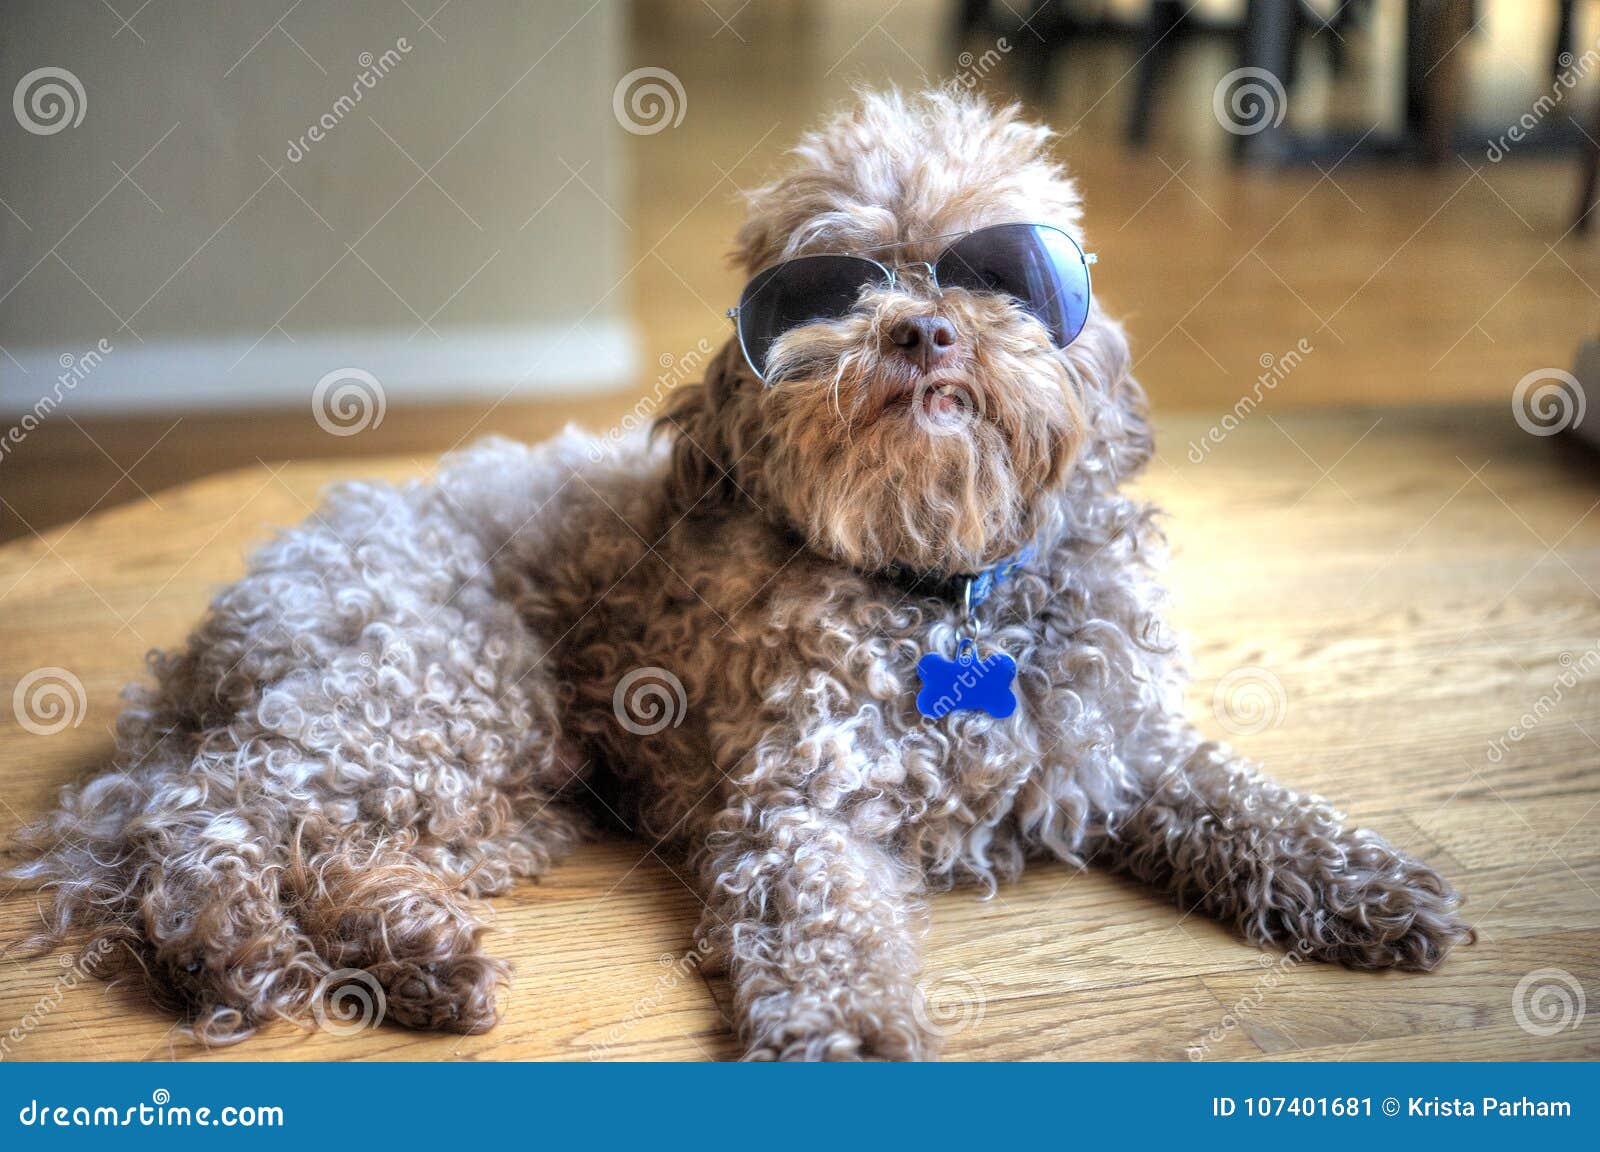 dog laying down sporting sunglasses